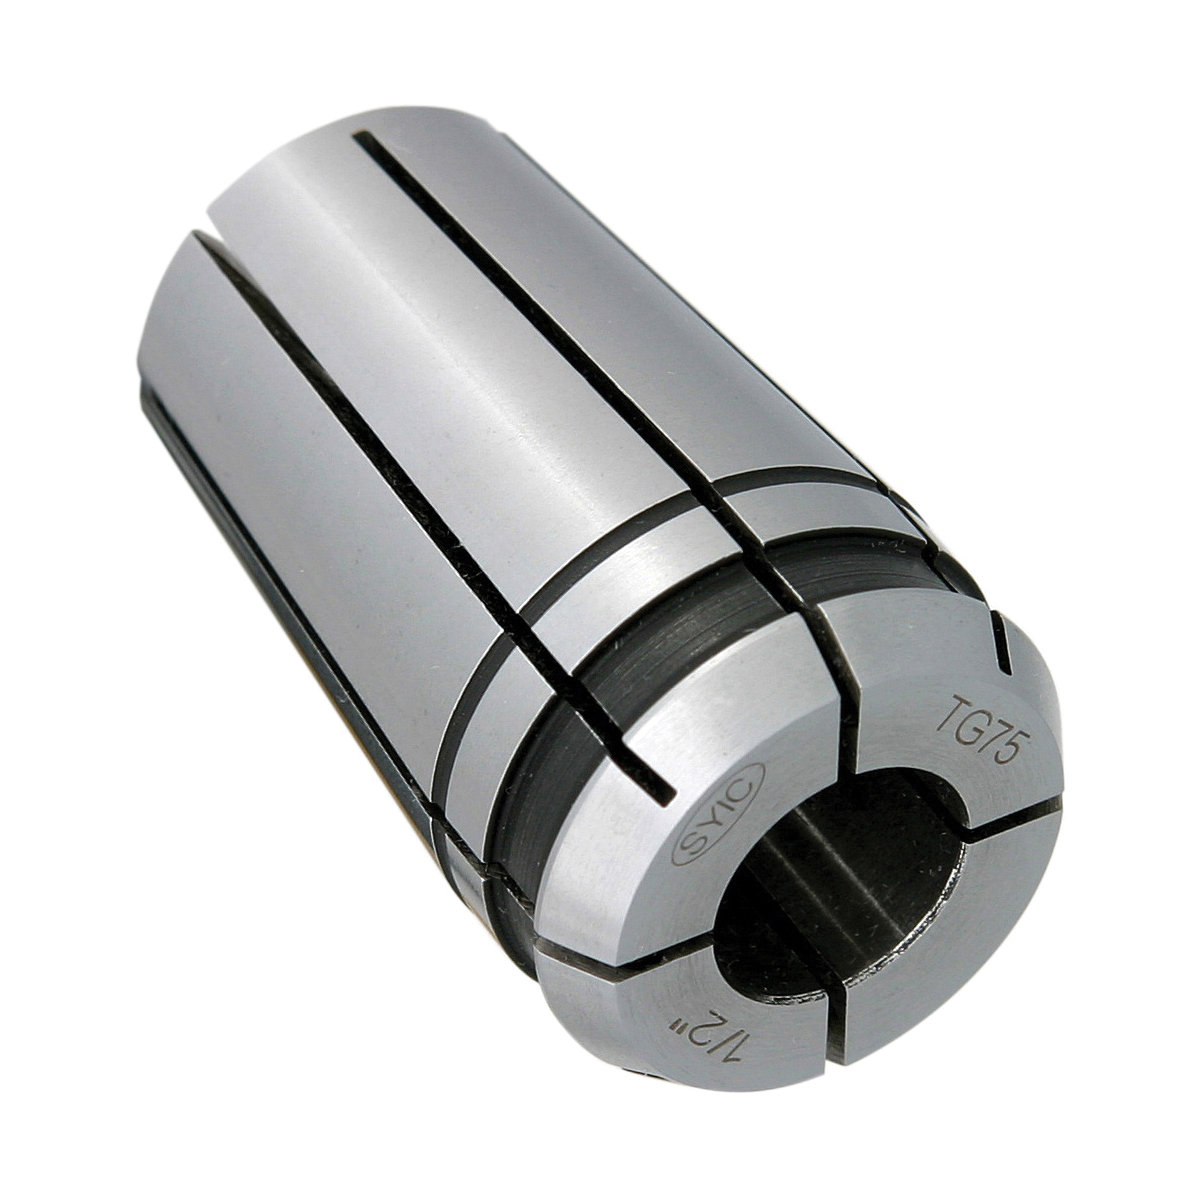 TG75 23/64" COLLET